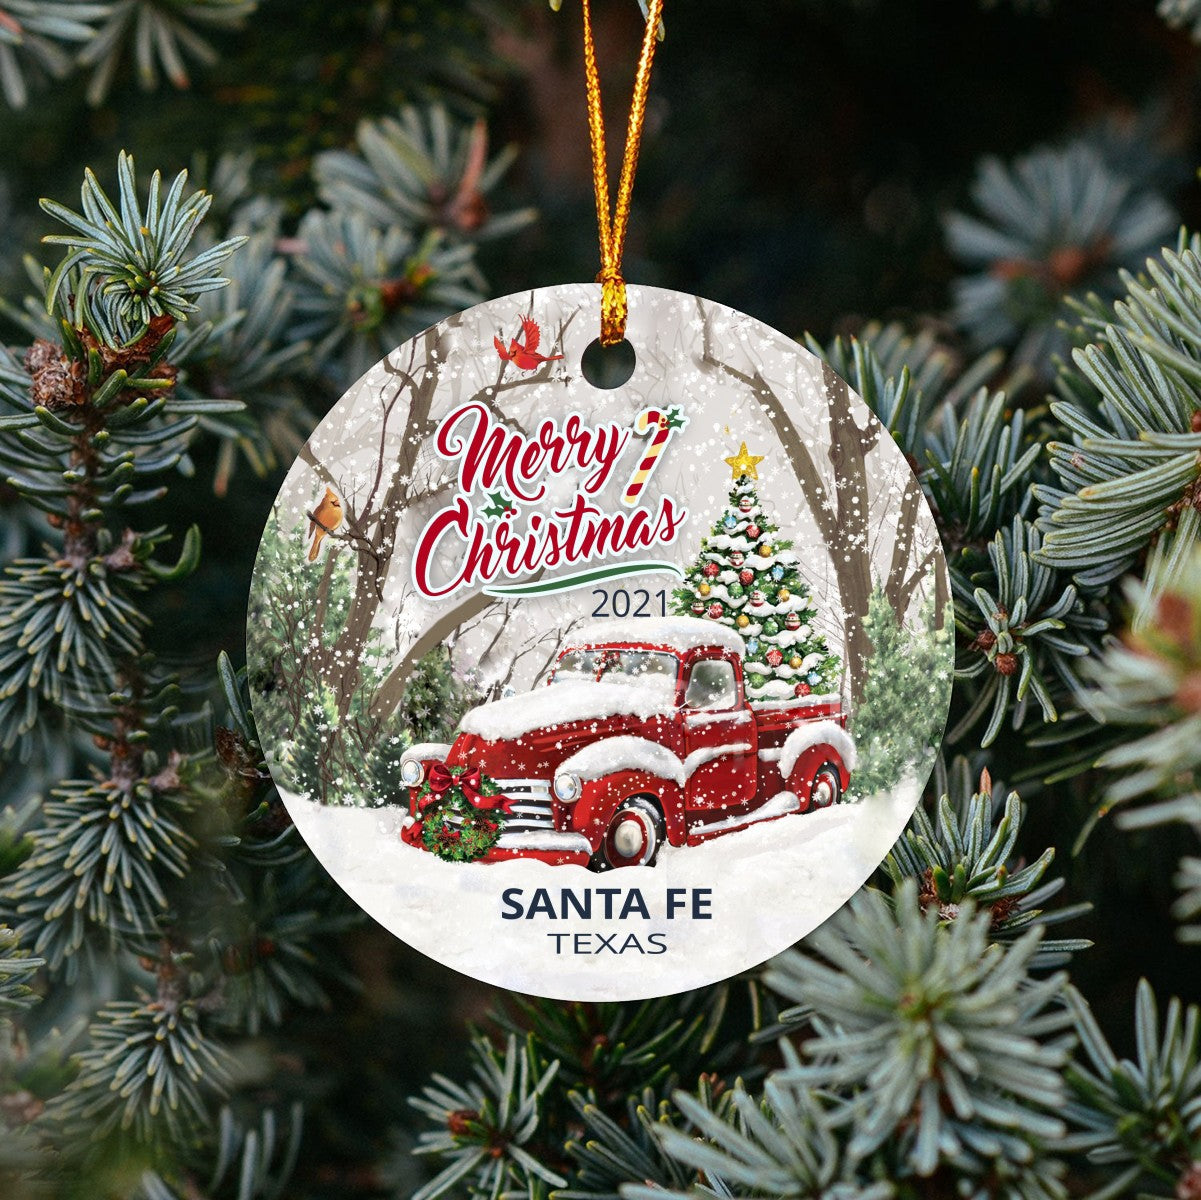 Christmas Tree Ornaments Santa Fe - Ornament With Name City, State Santa Fe Texas TX Ornament - Red Truck Xmas Ornaments 3'' Plastic Gift For Family, Friend And Housewarming